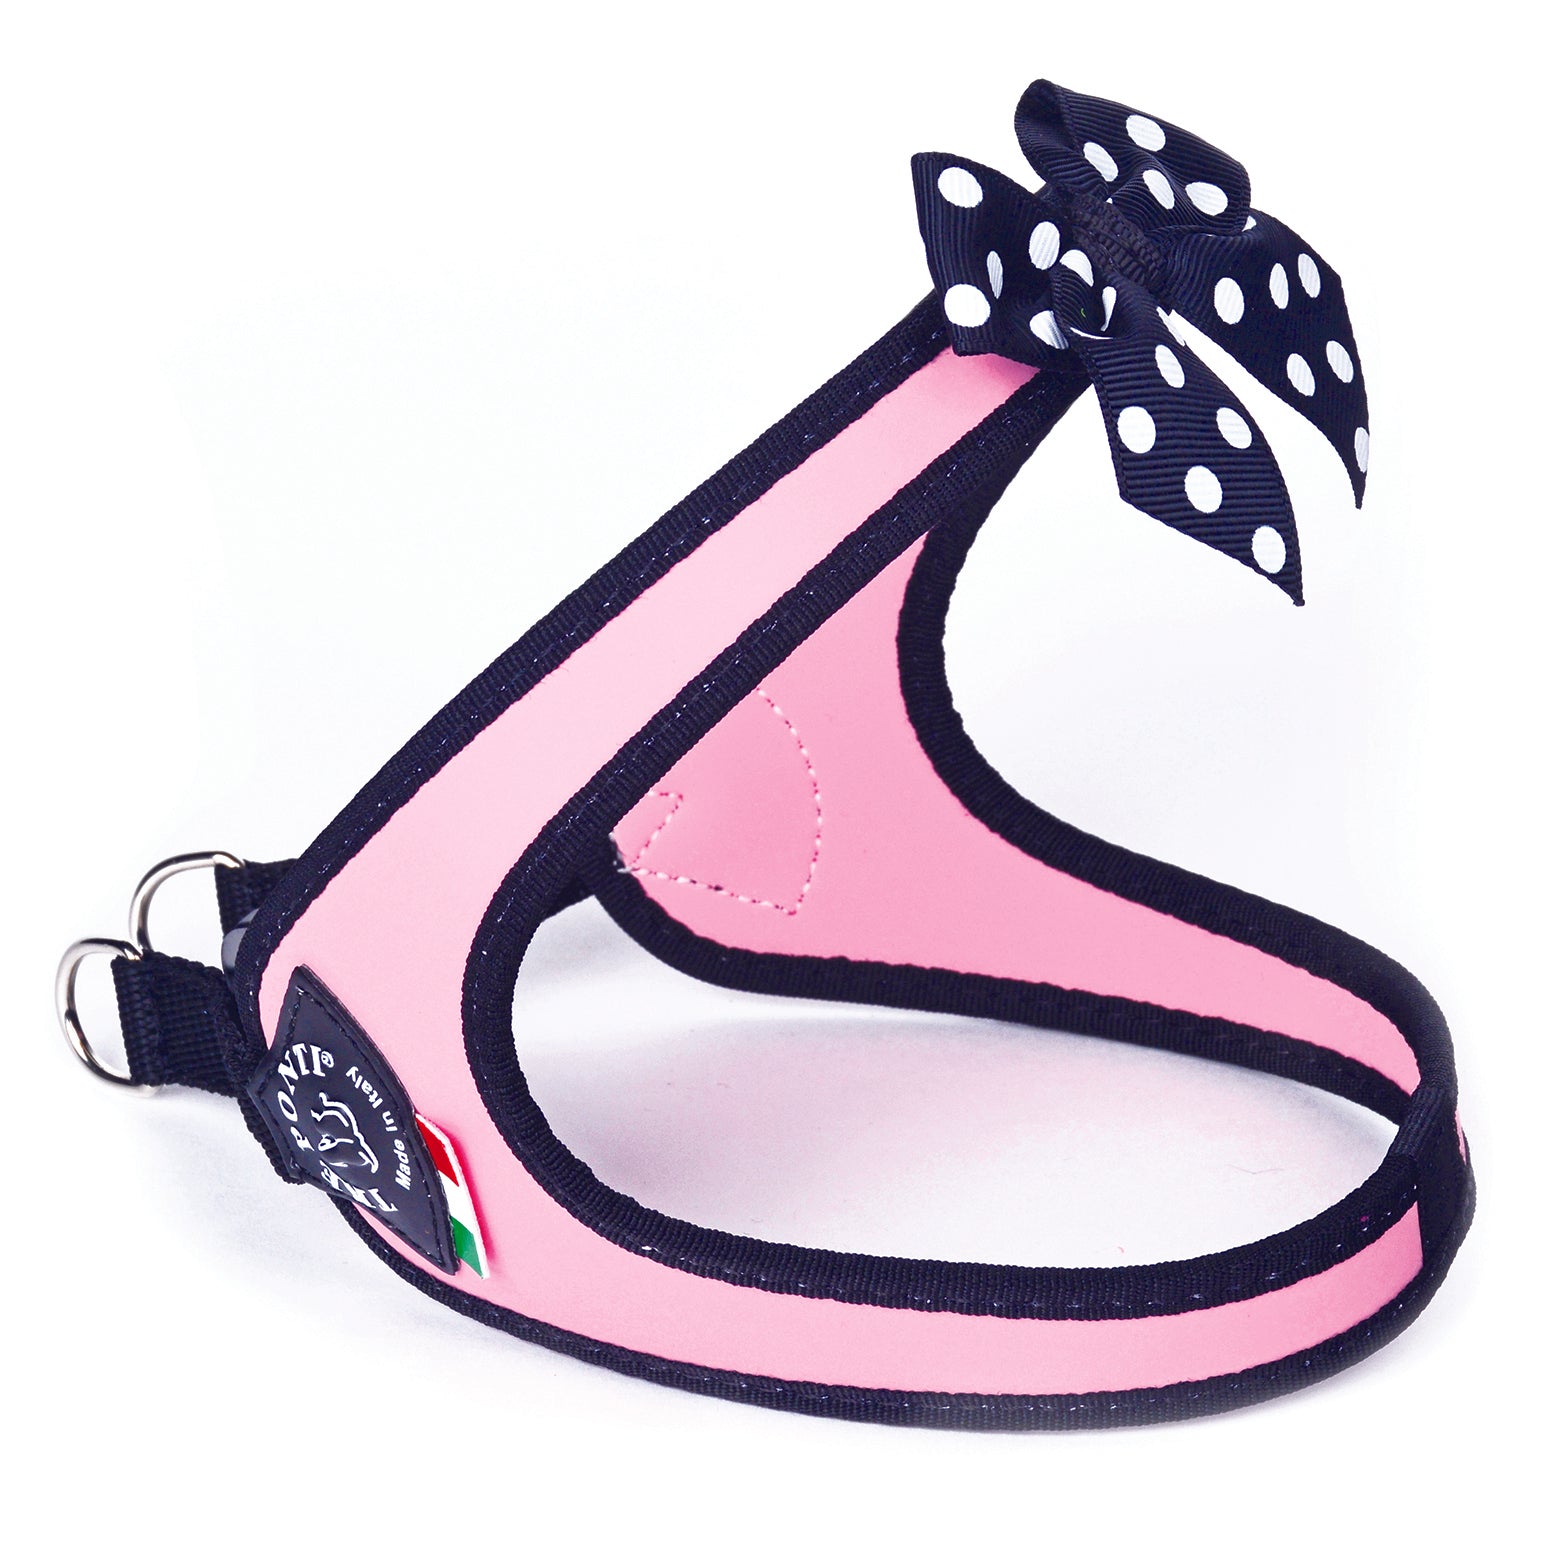 Easy Fit Fashion Harness with Polka Dot Bow Pink